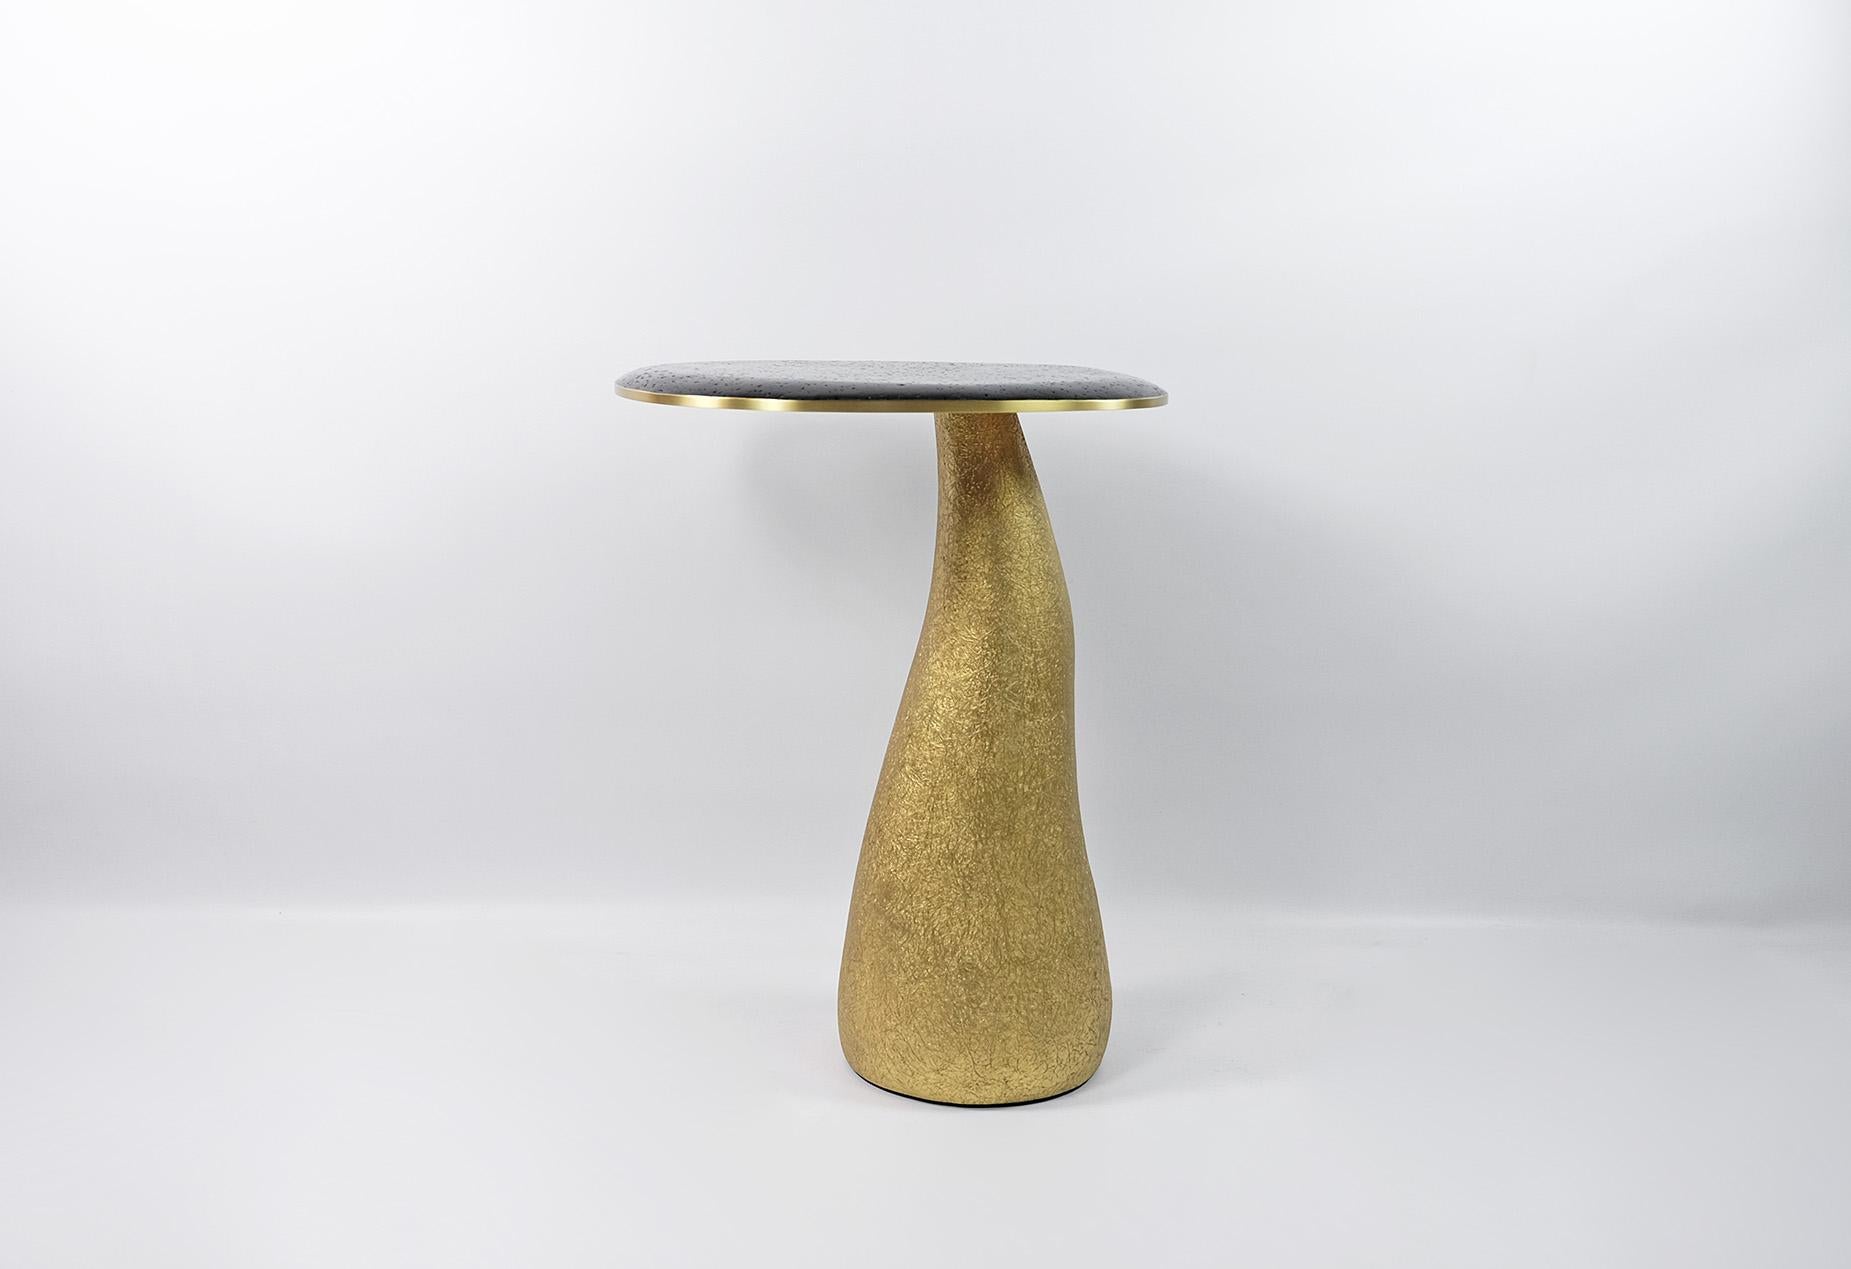 Hand-Crafted Side Table in Lava Stone and brass with a Gilded Base